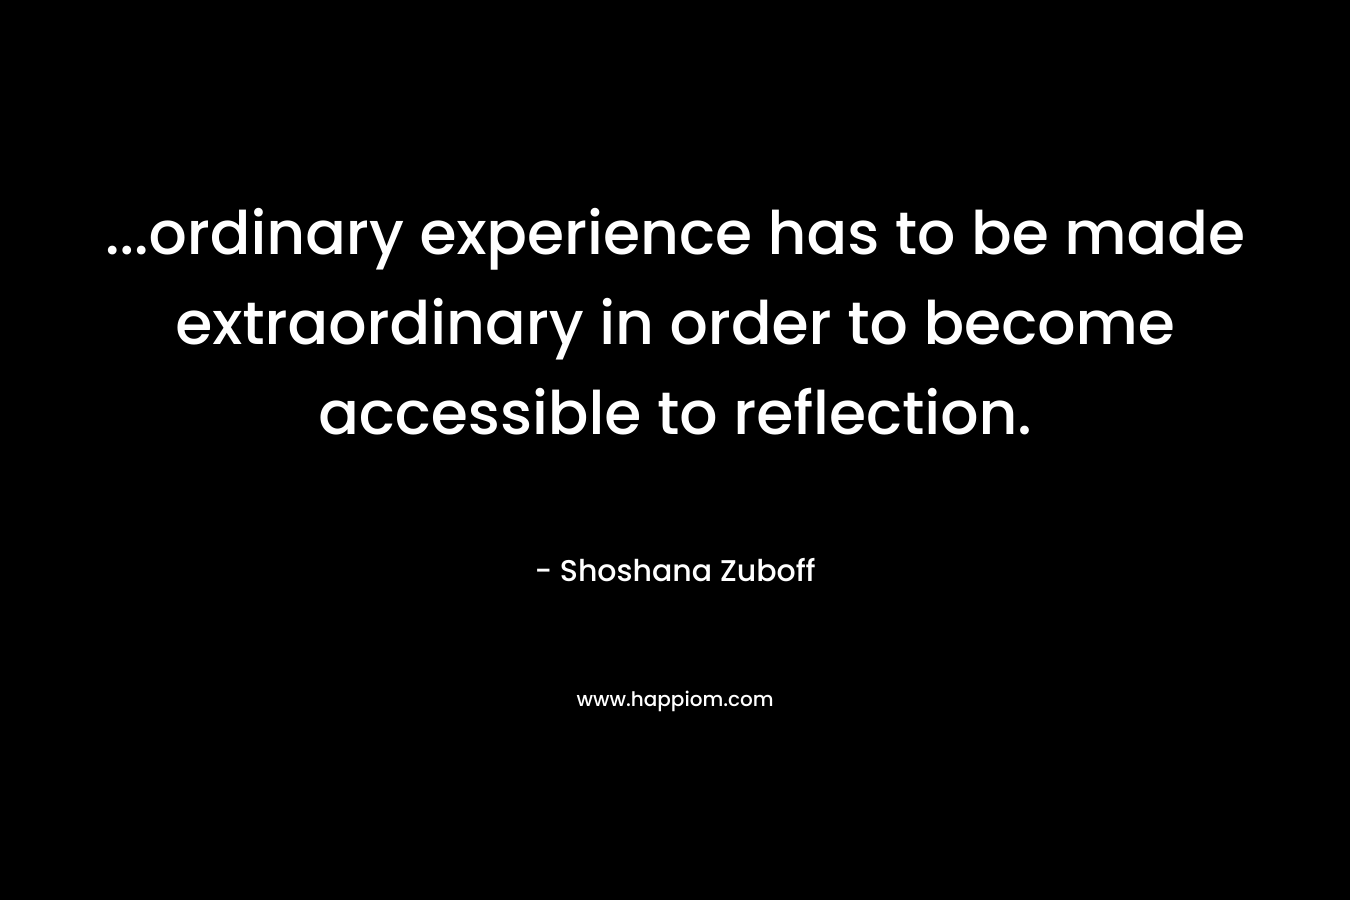 ...ordinary experience has to be made extraordinary in order to become accessible to reflection.